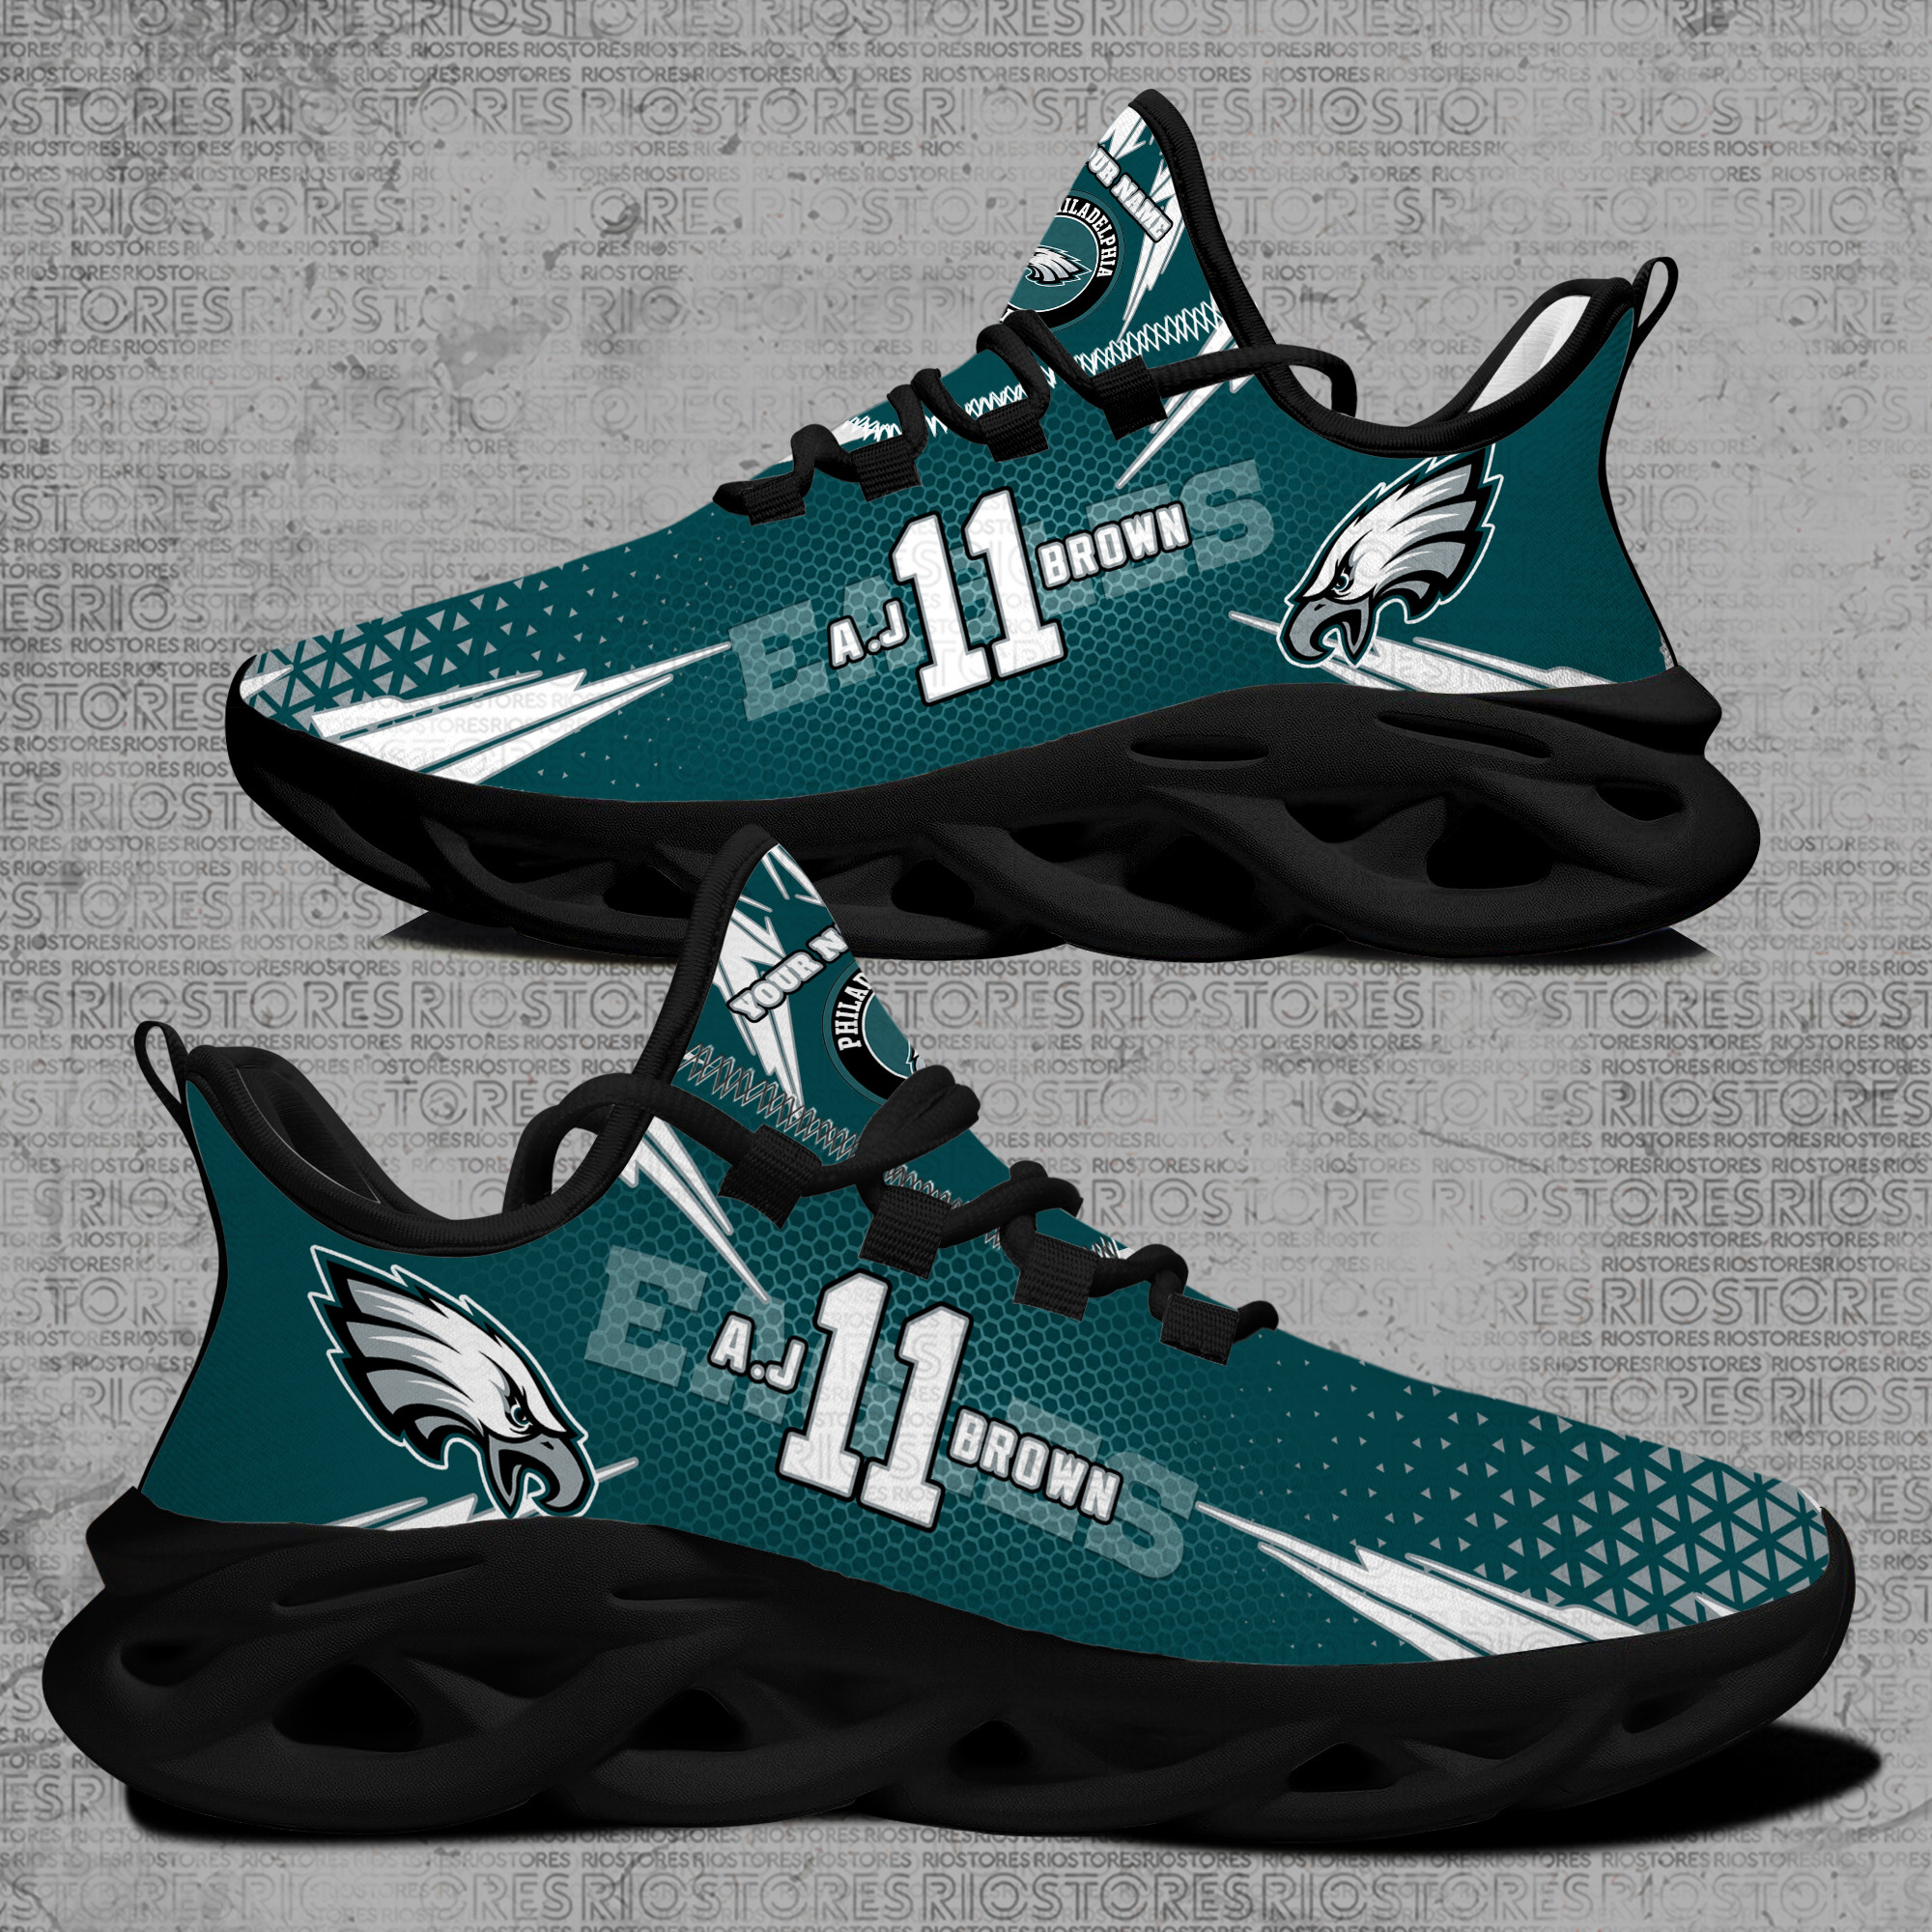 A J Brown Phil_eagles Football Customize Sporty Max Soul Sneakers Running Sport For Men For Fan